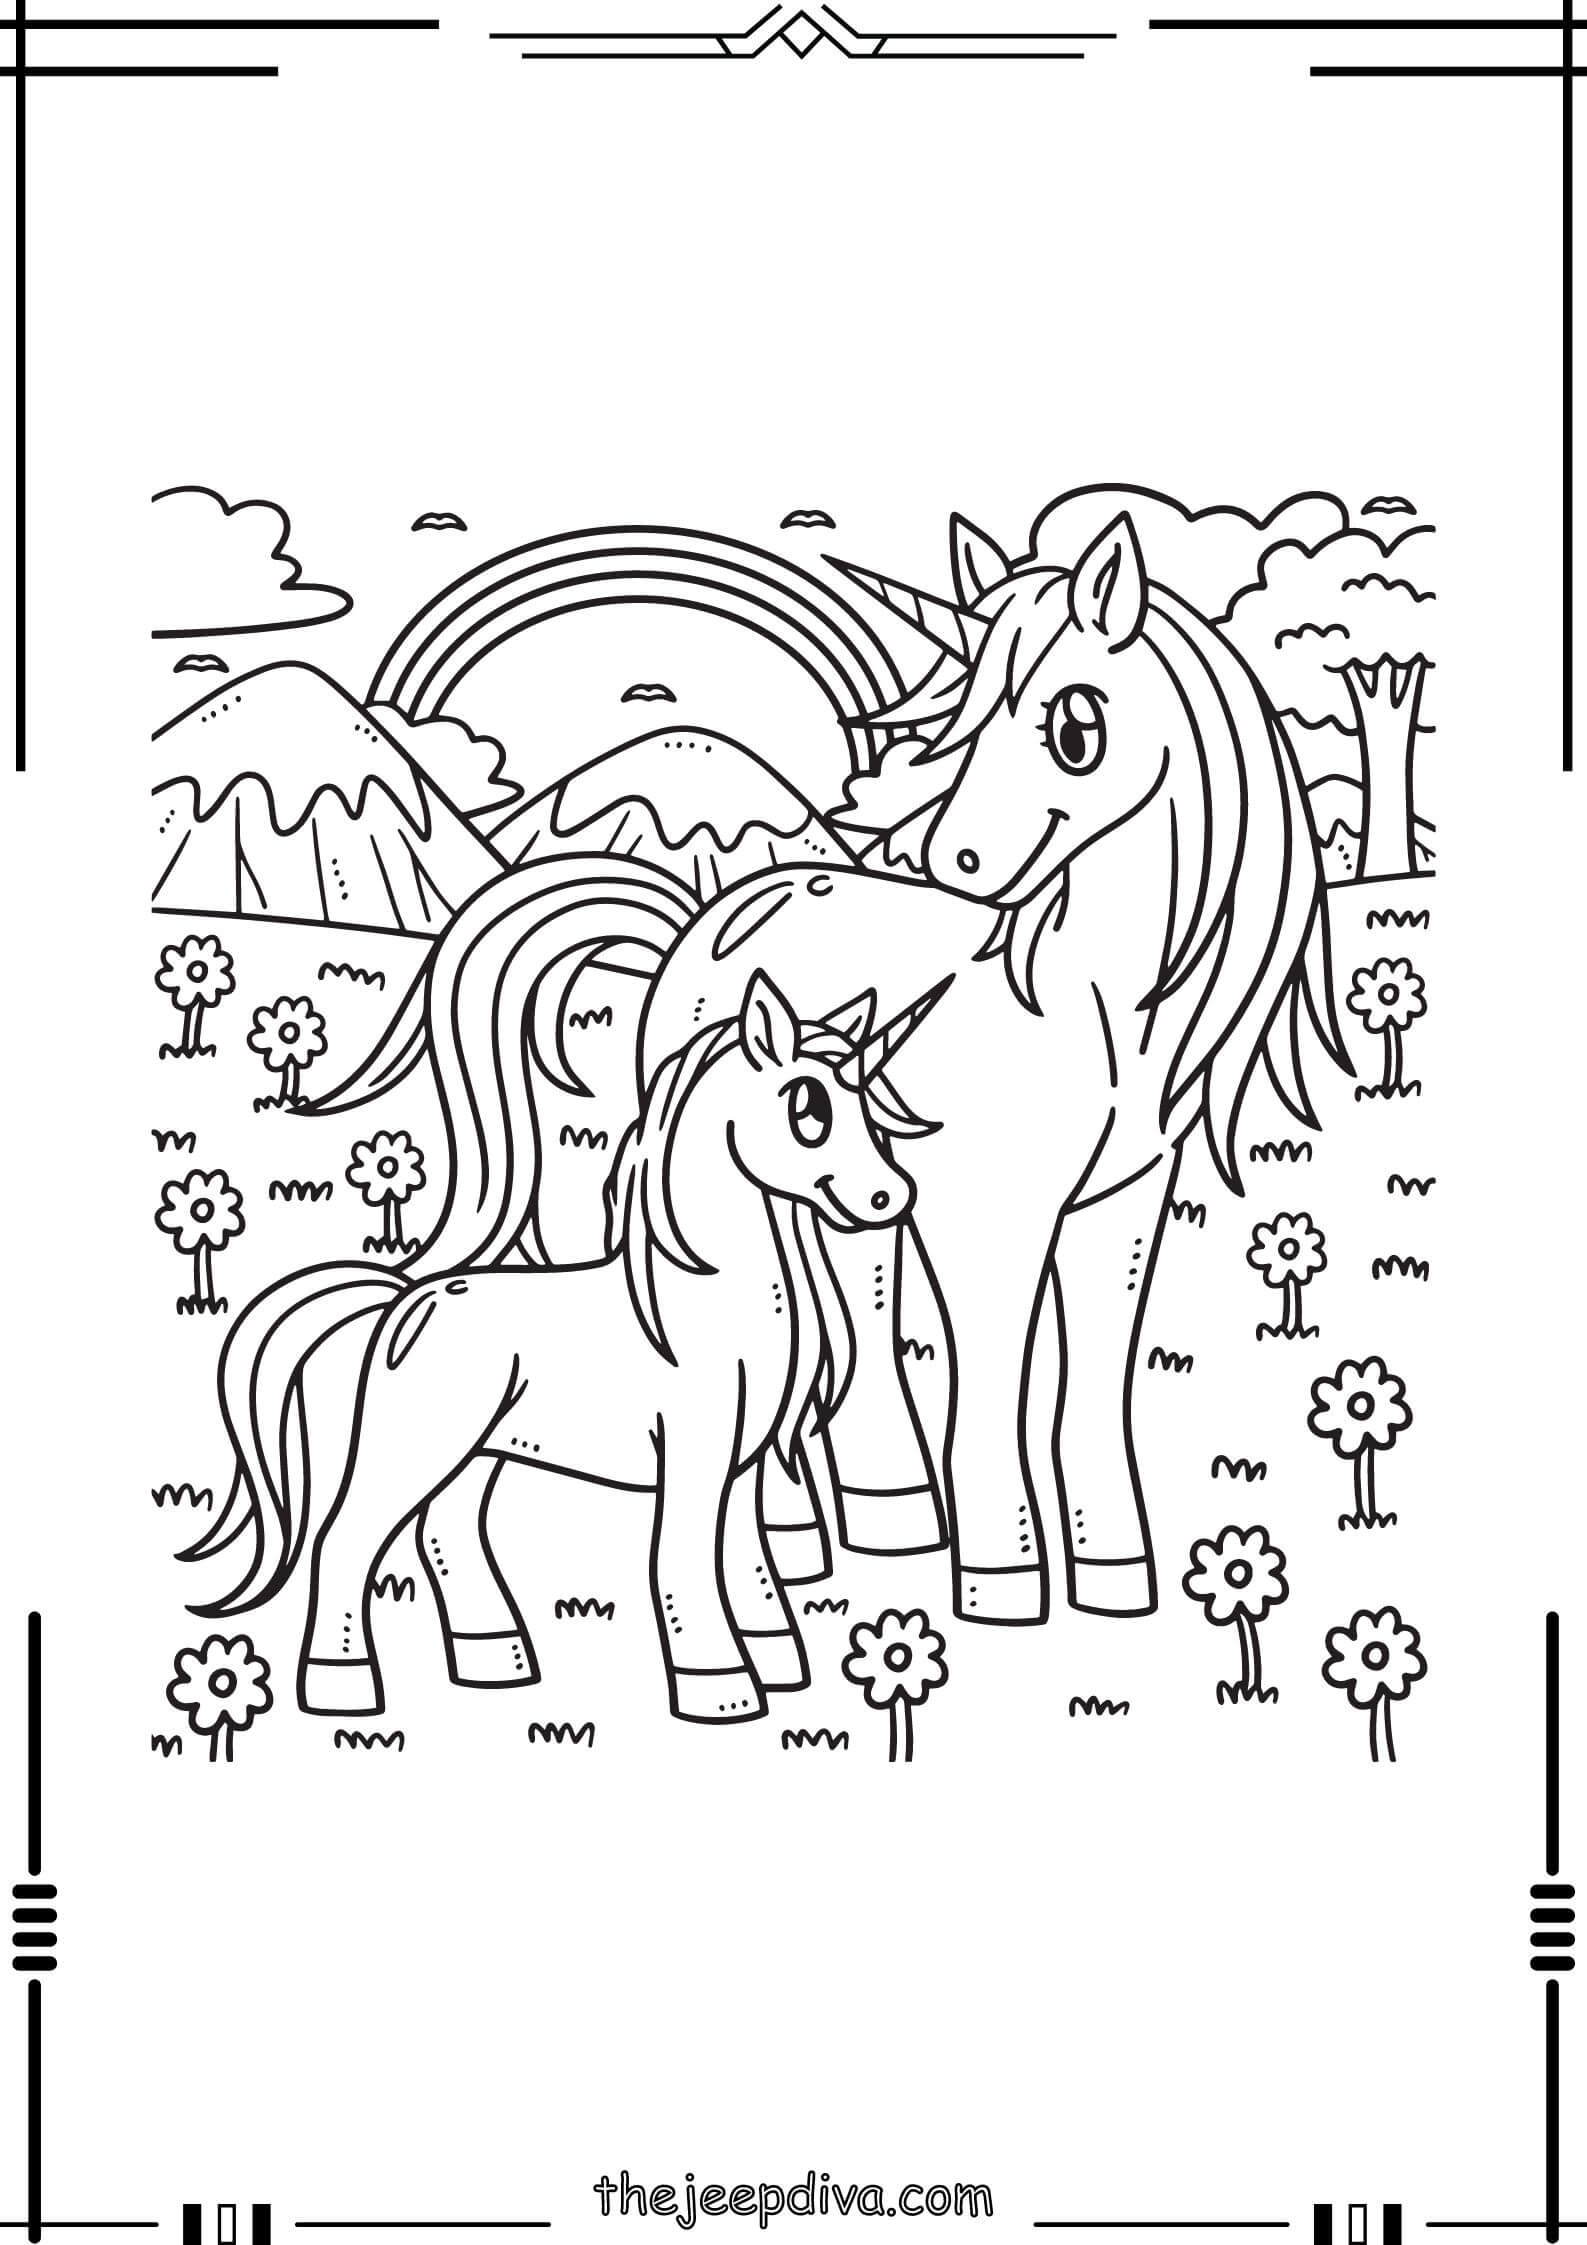 unicorn-coloring-page-easy-22